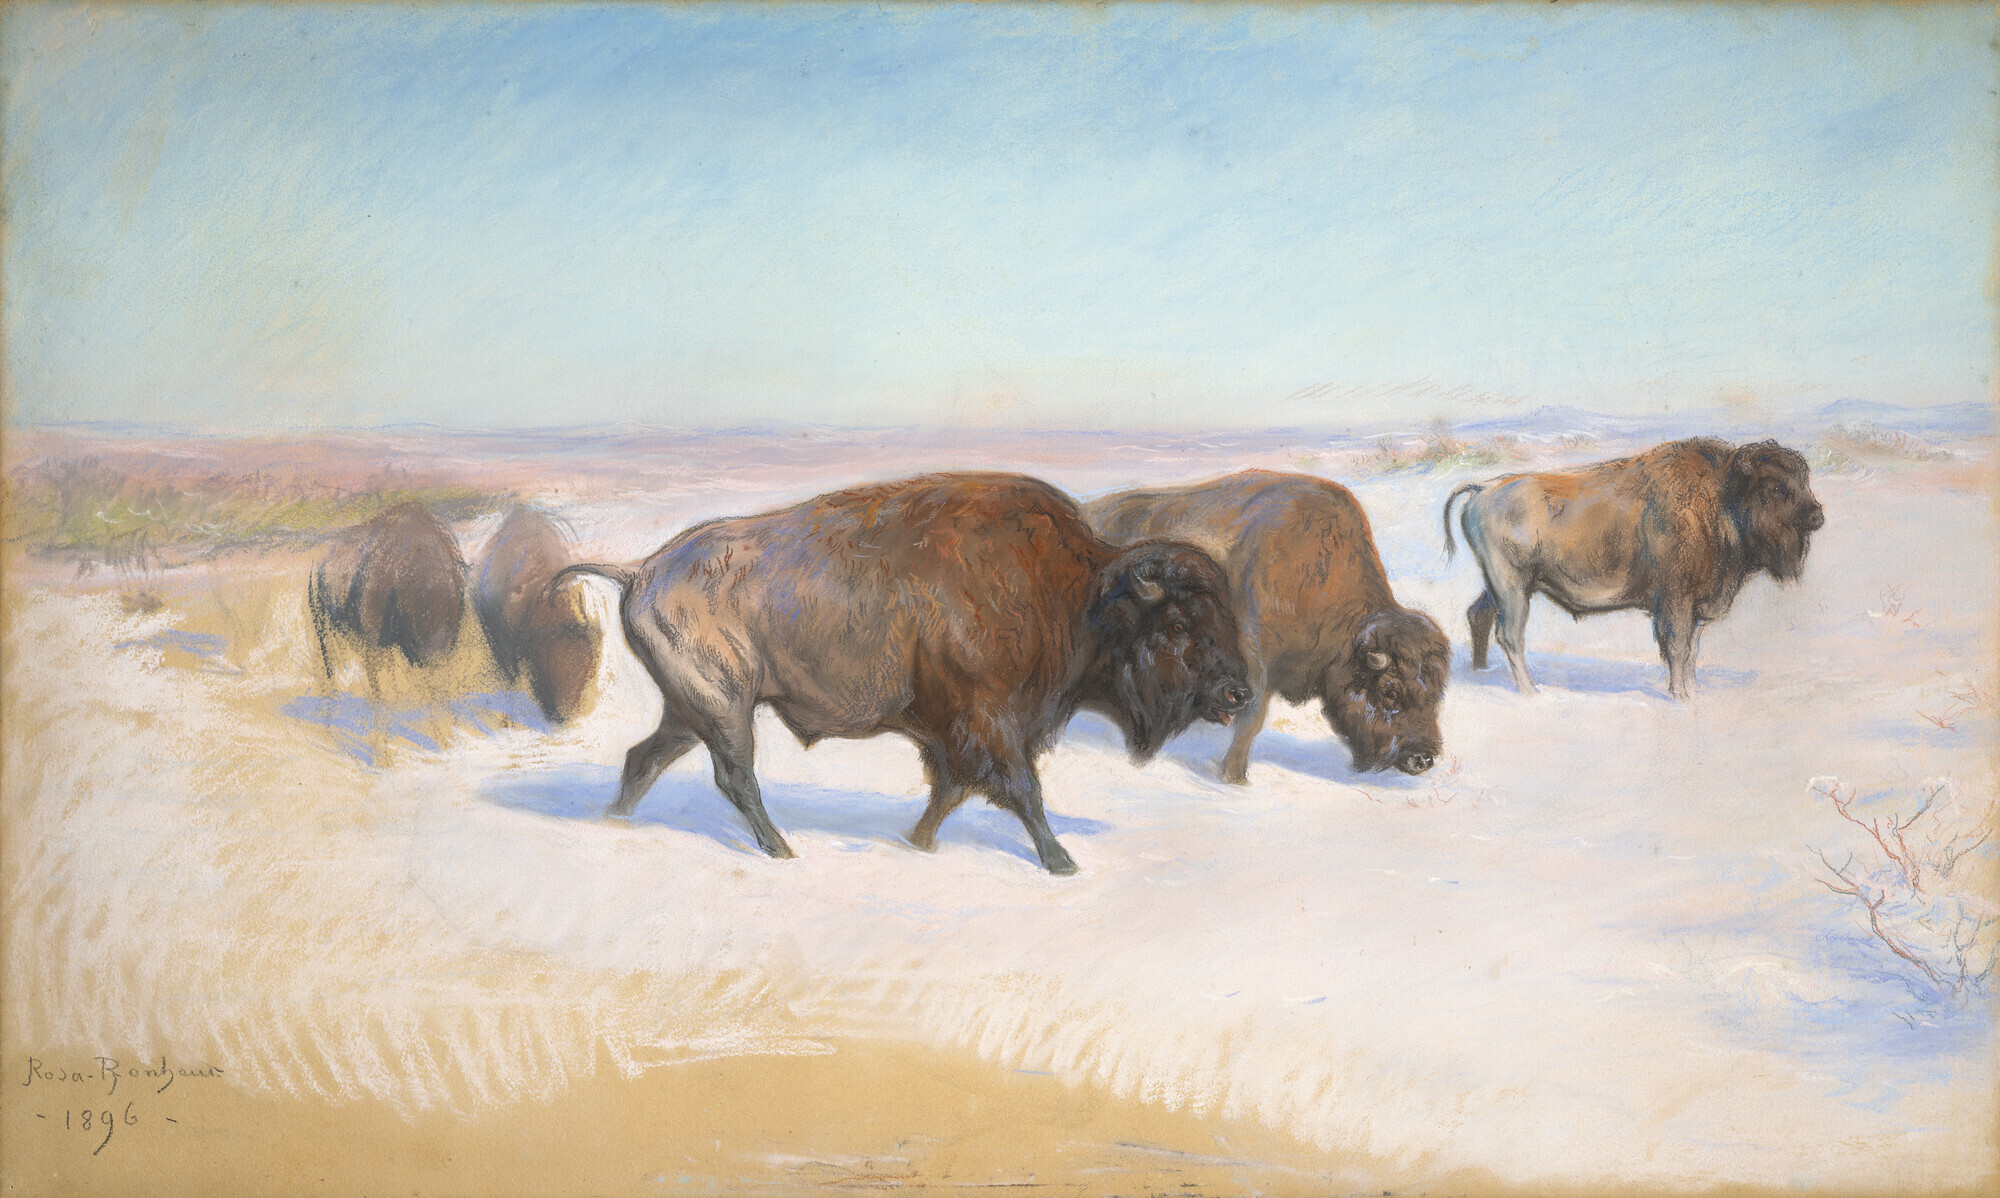 <strong>Rosa Bonheur’s American Dream</strong> 
<strong>An unpublished pastel by the artist</strong> 
<strong>to be auctioned on 20 March </strong> 